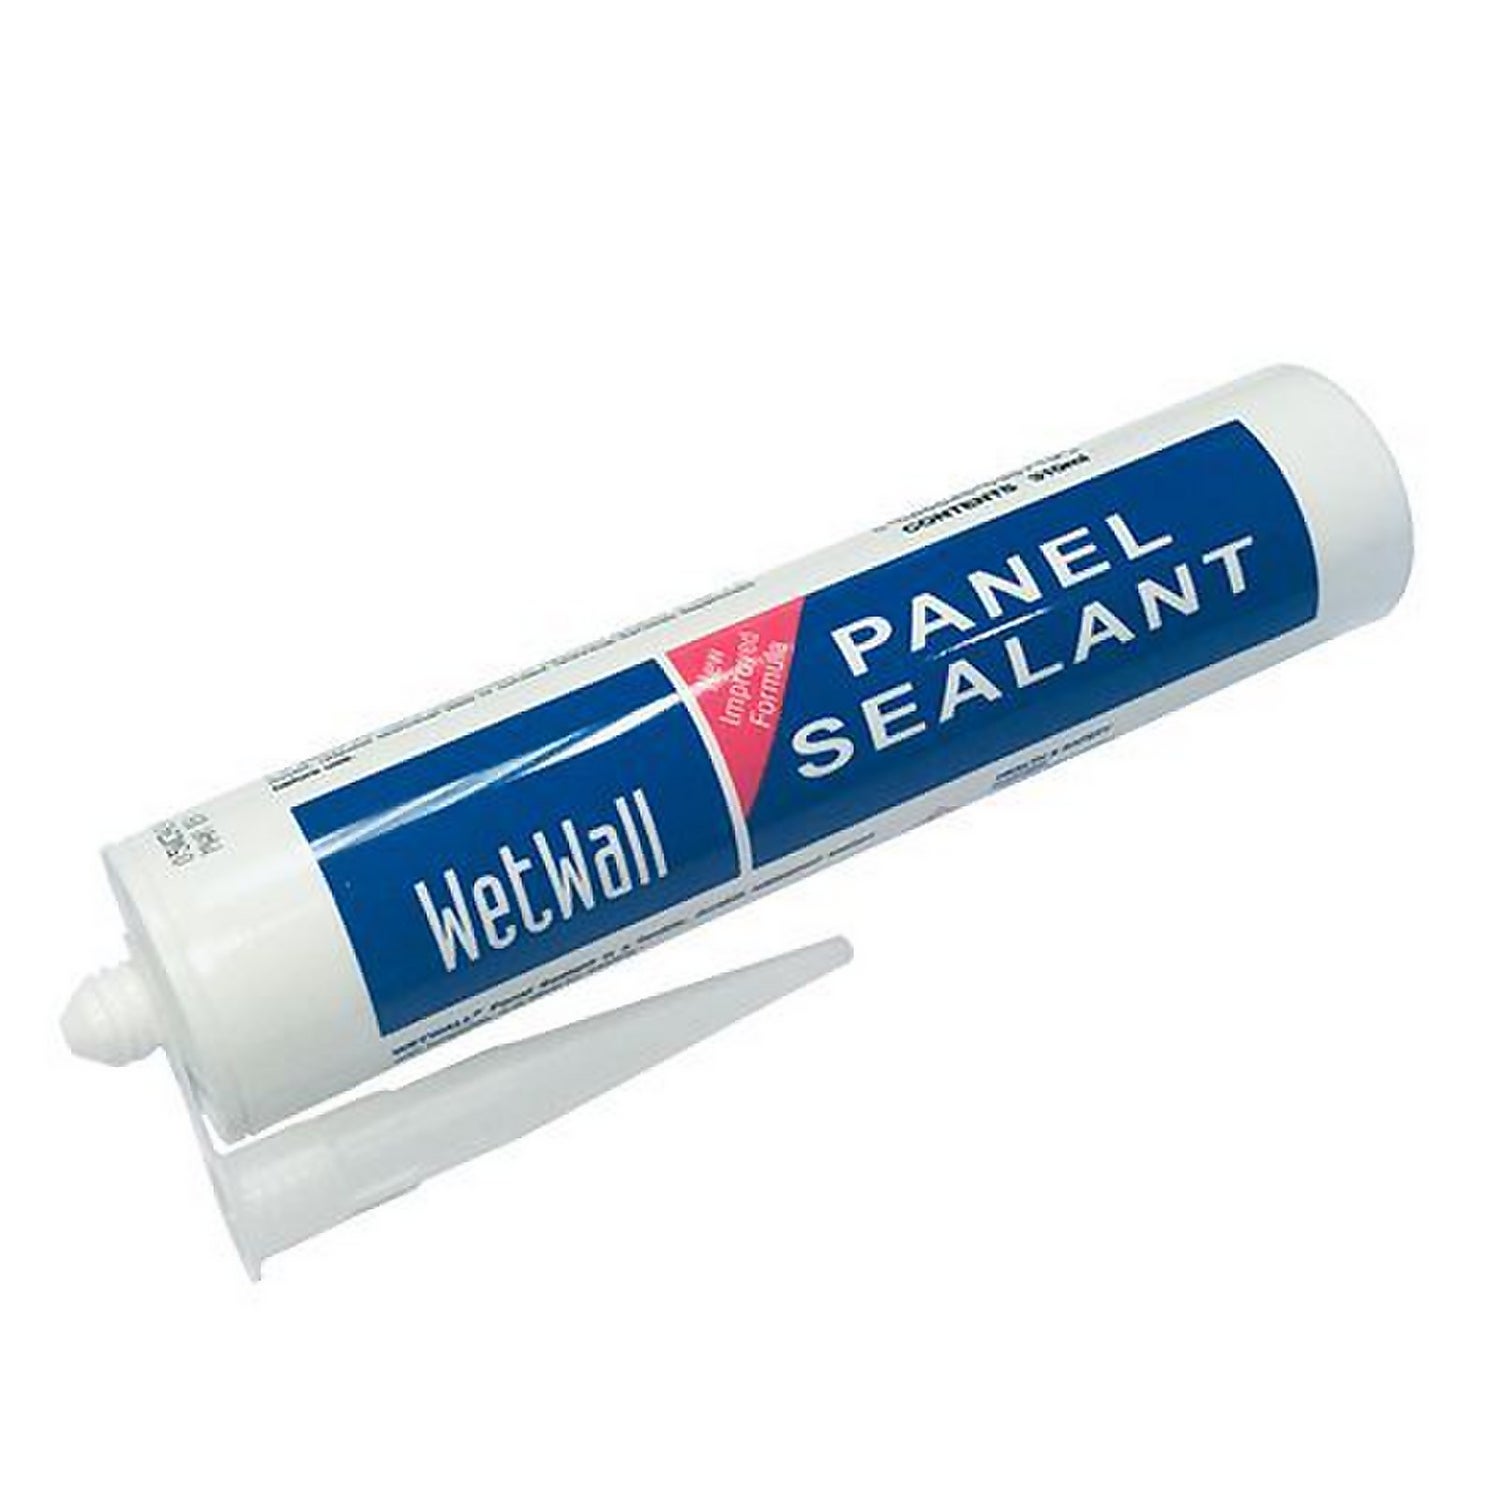 Wetwall panel sealant - clear 310ml